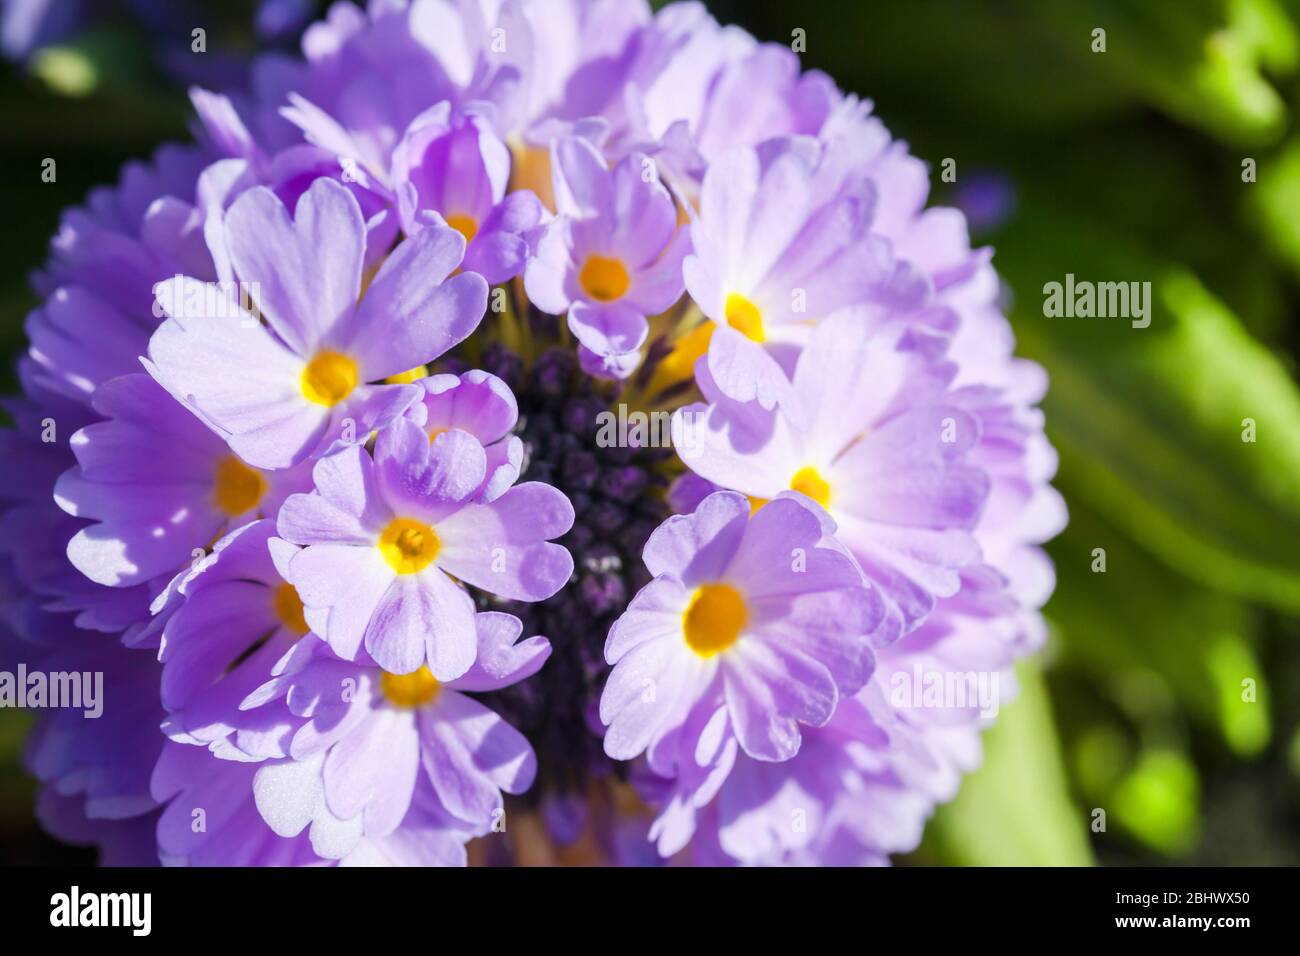 Bright spring flowers in a sunshine, macro photo. Primula denticulata, or the drumstick primula, flowering plant in the family Primulaceae Stock Photo